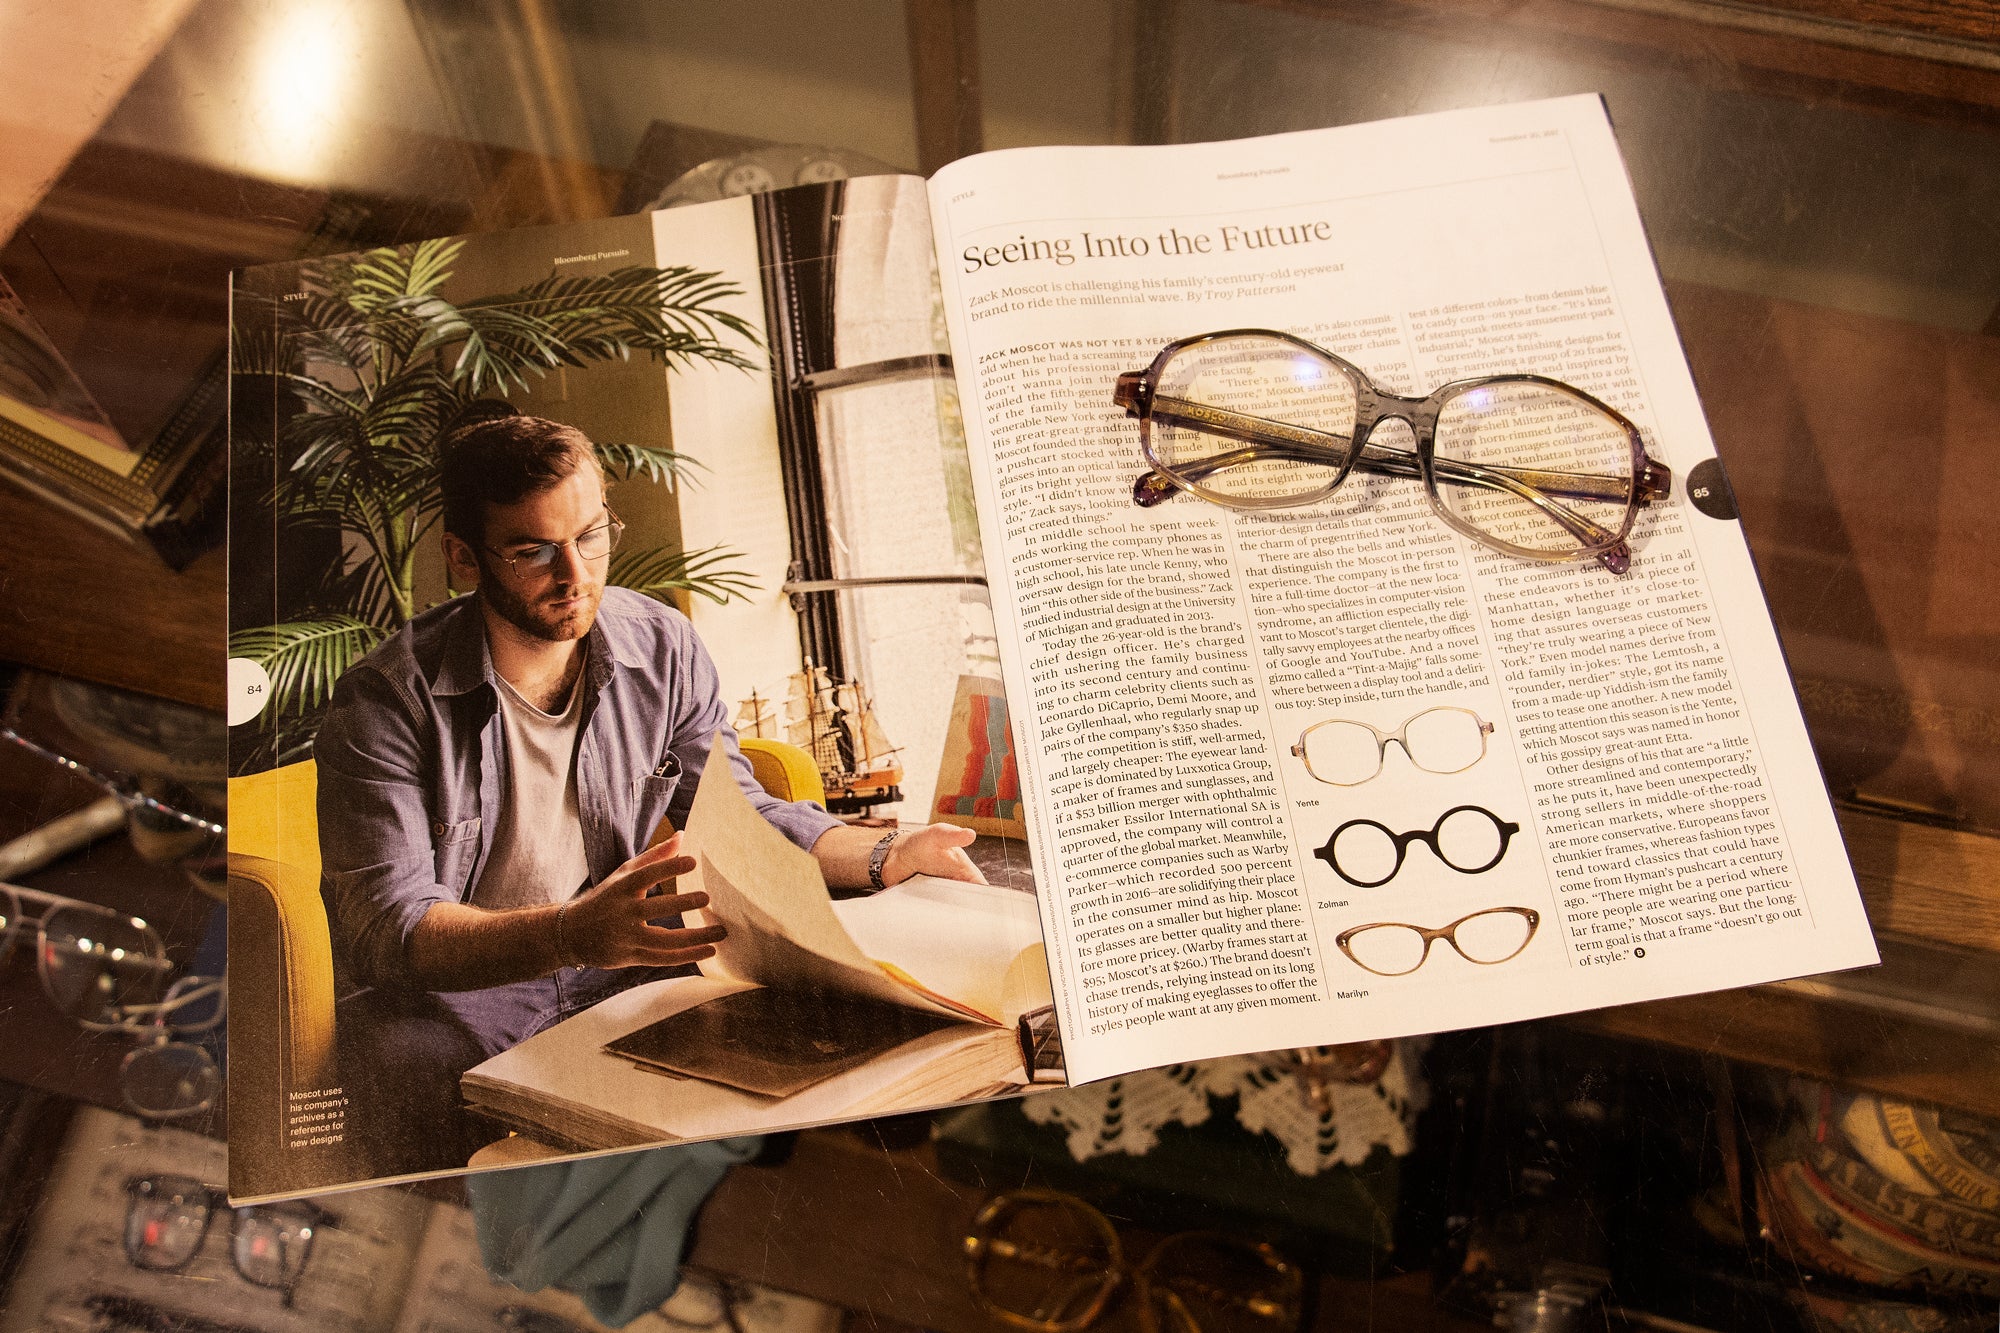 Bloomberg features Zack on Keeping MOSCOT Fresh